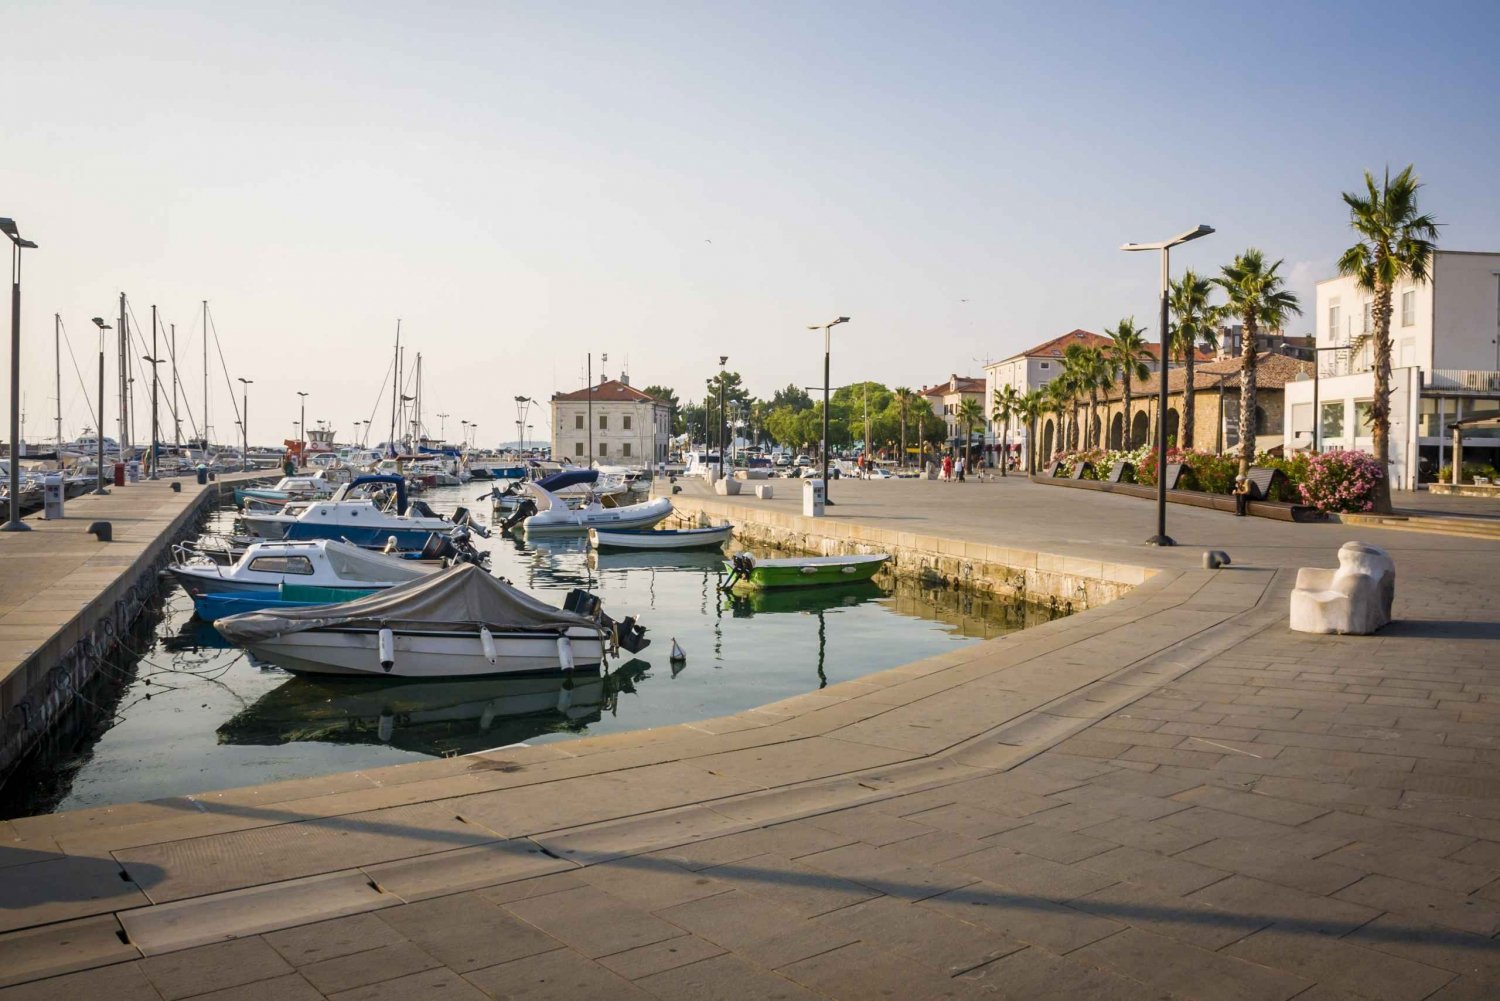 From Koper: Slovenian Coast Private Roundtrip from Port